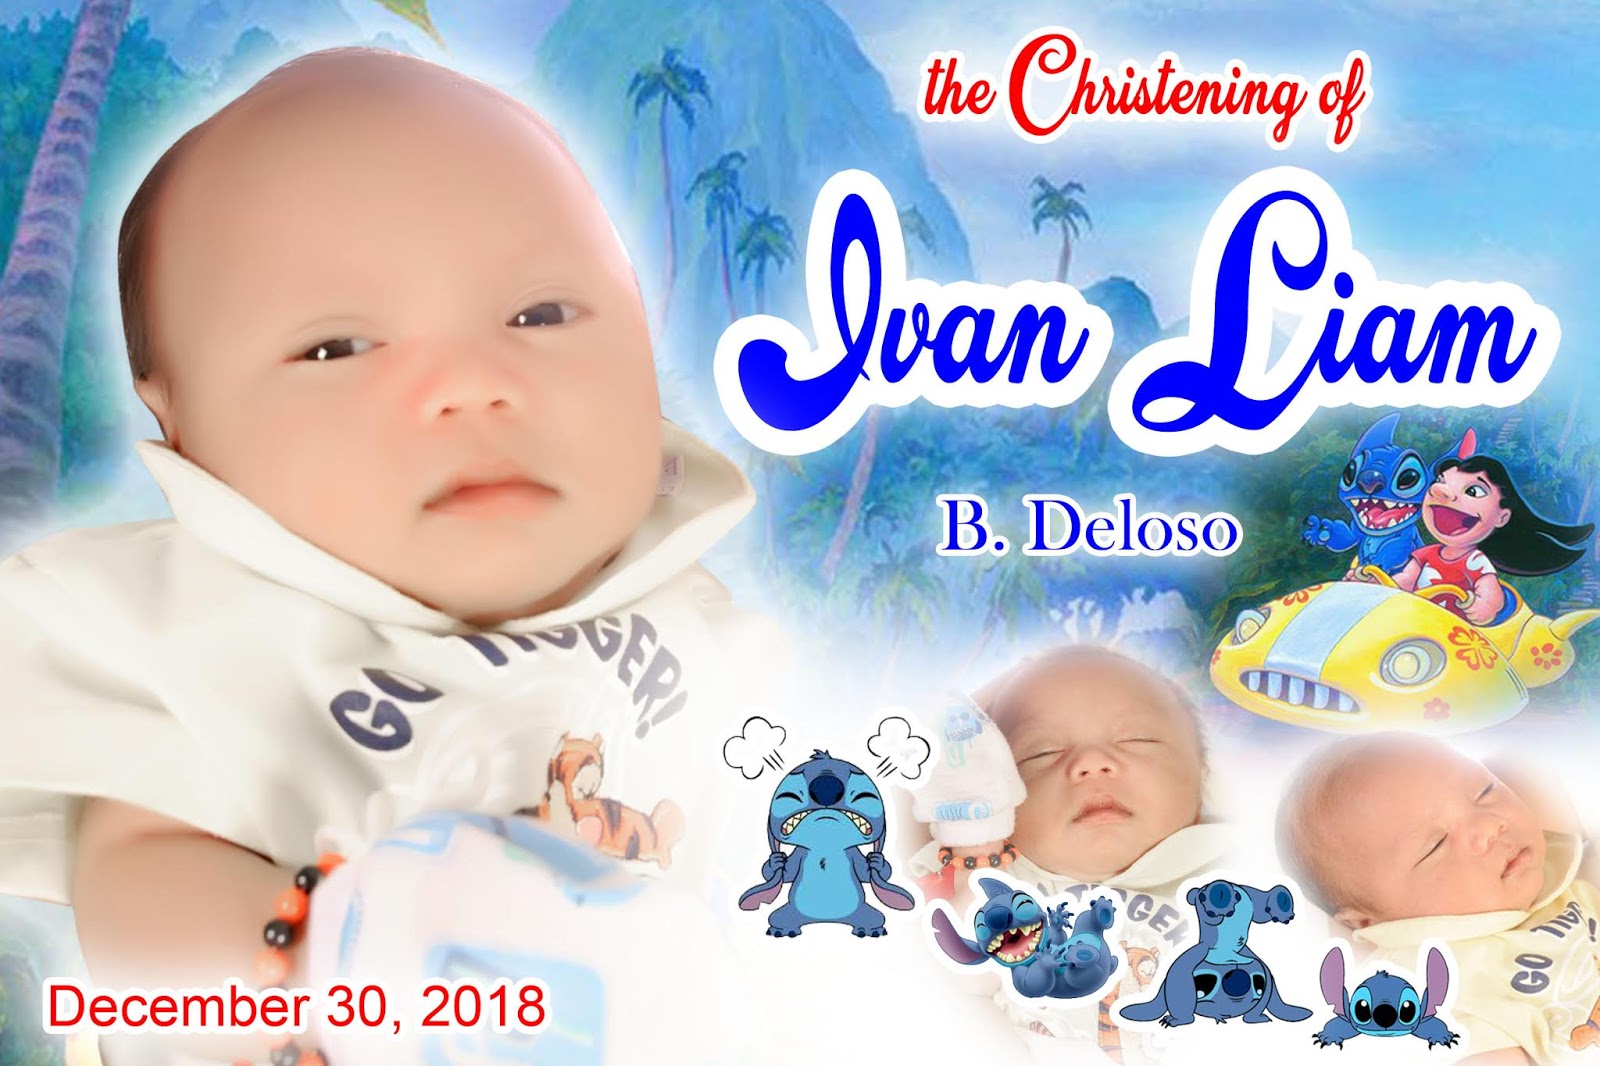 The Christening Of Ivan Liam B Deloso TARP LAYOUT FREE DOWNLOAD PSD FREE PSD FULLY 